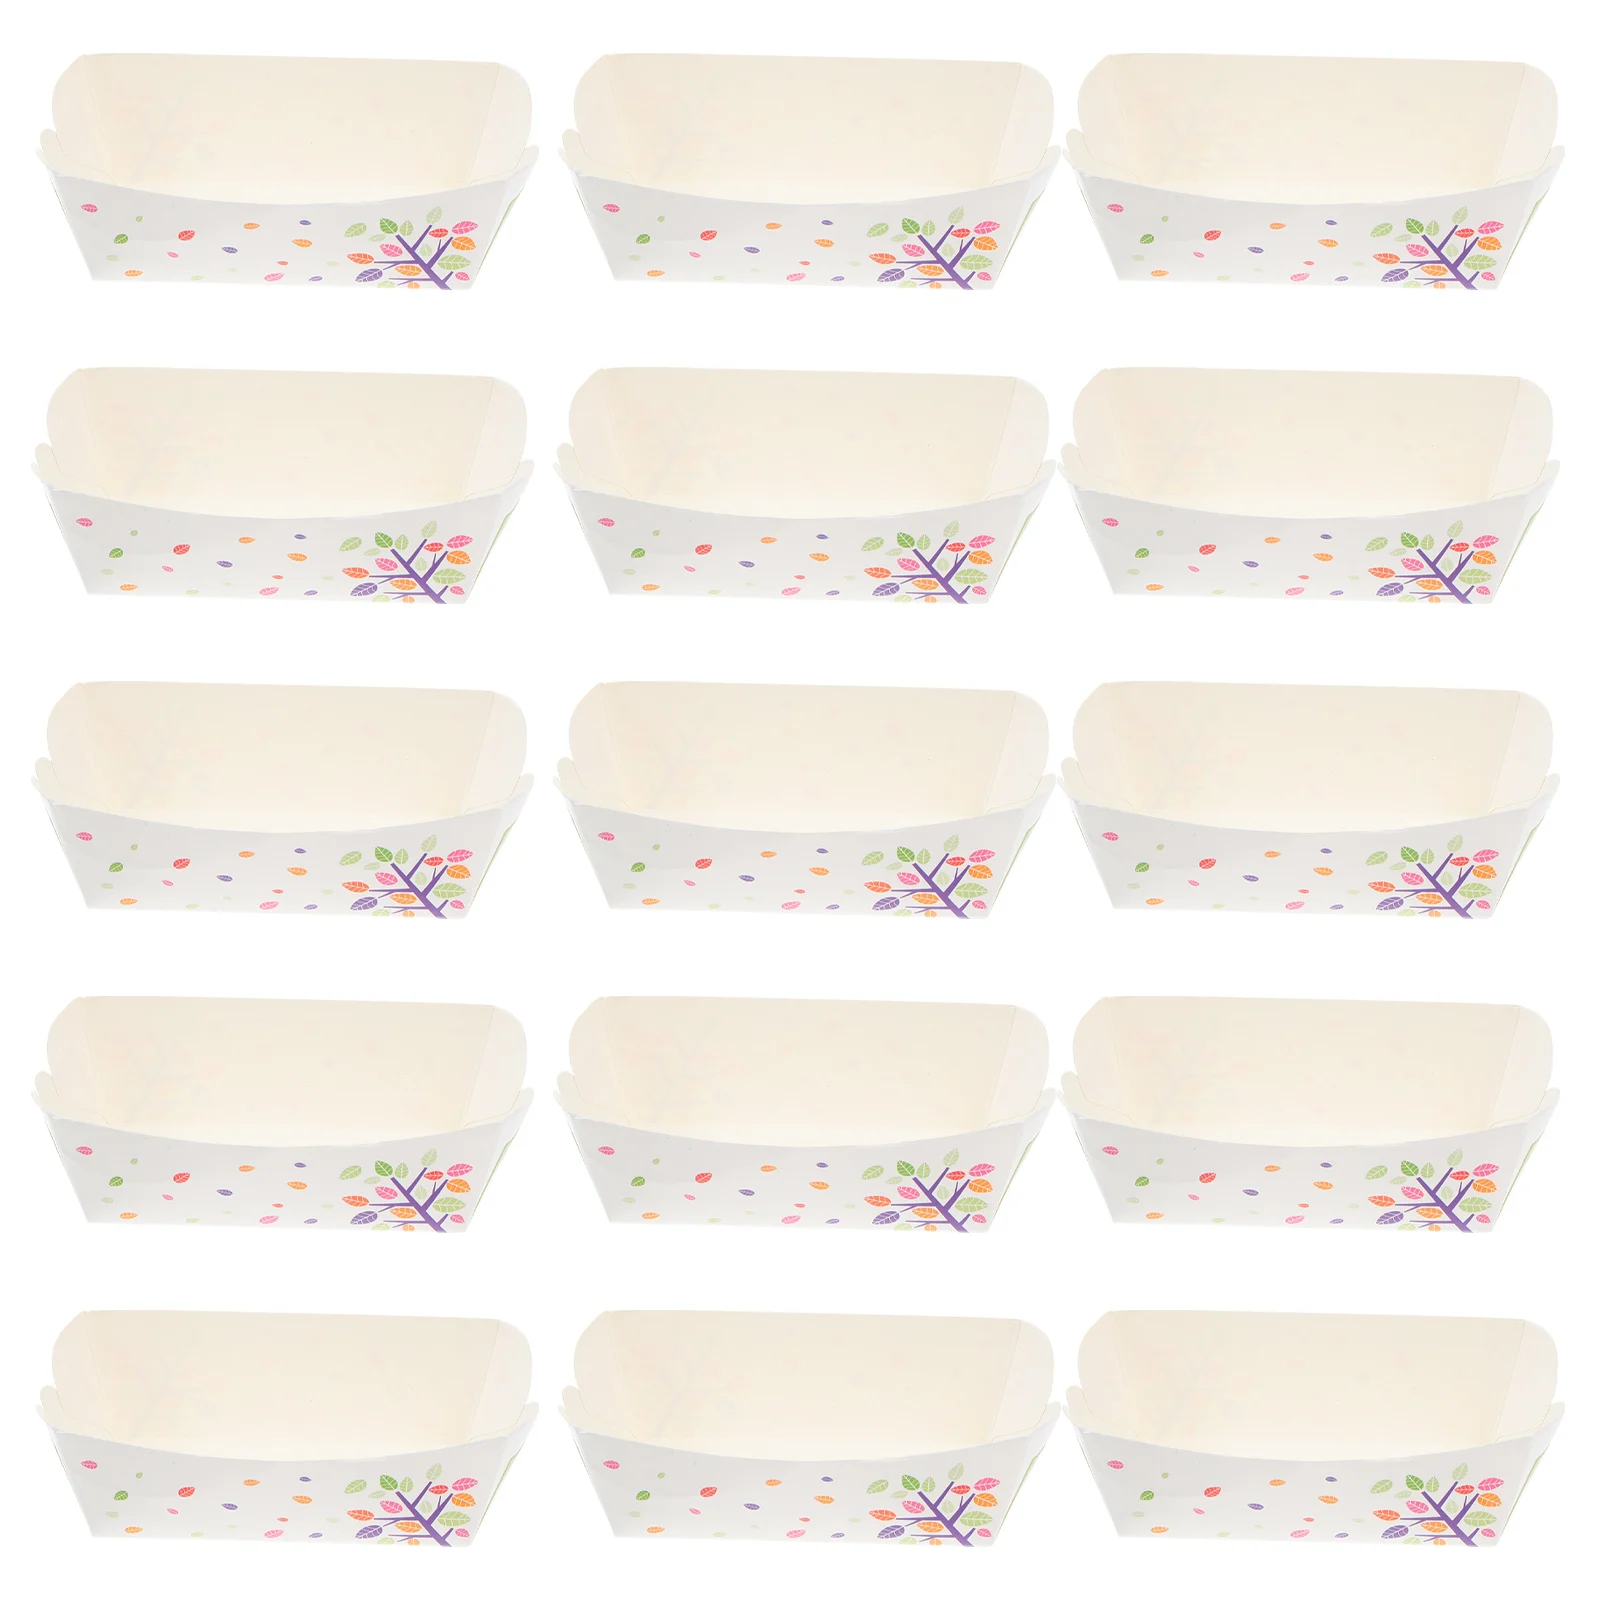 100pcs Disposable Boat Shaped Paper Food Serving Tray Food Packi